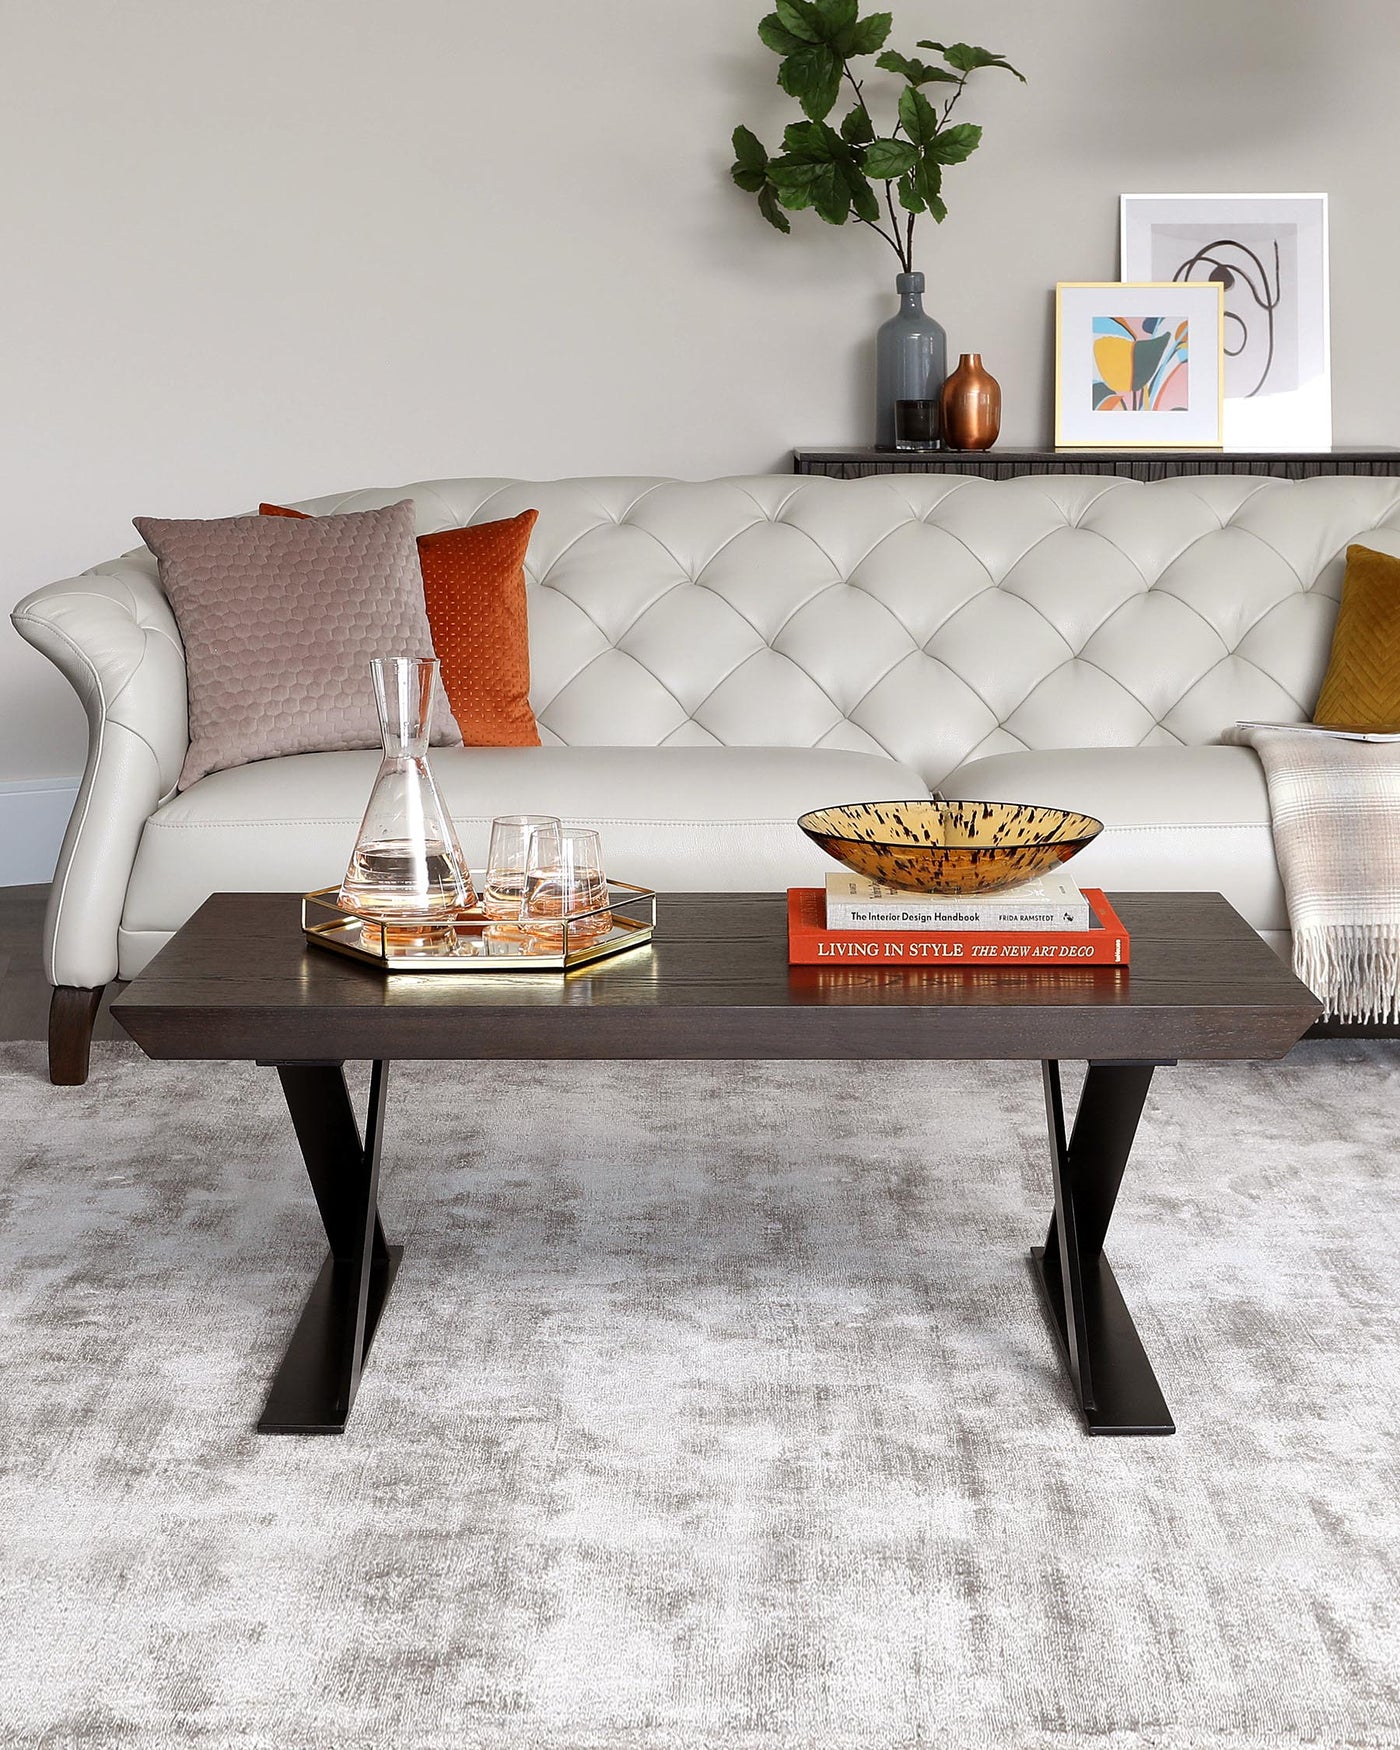 Elegant modern living room featuring a button-tufted white leather Chesterfield sofa with grey and orange throw pillows, accompanied by a dark wood coffee table with bold, angular black metal legs. The table displays a decorative tray with whisky glasses and a decanter, flanked by colourful hardcover books.